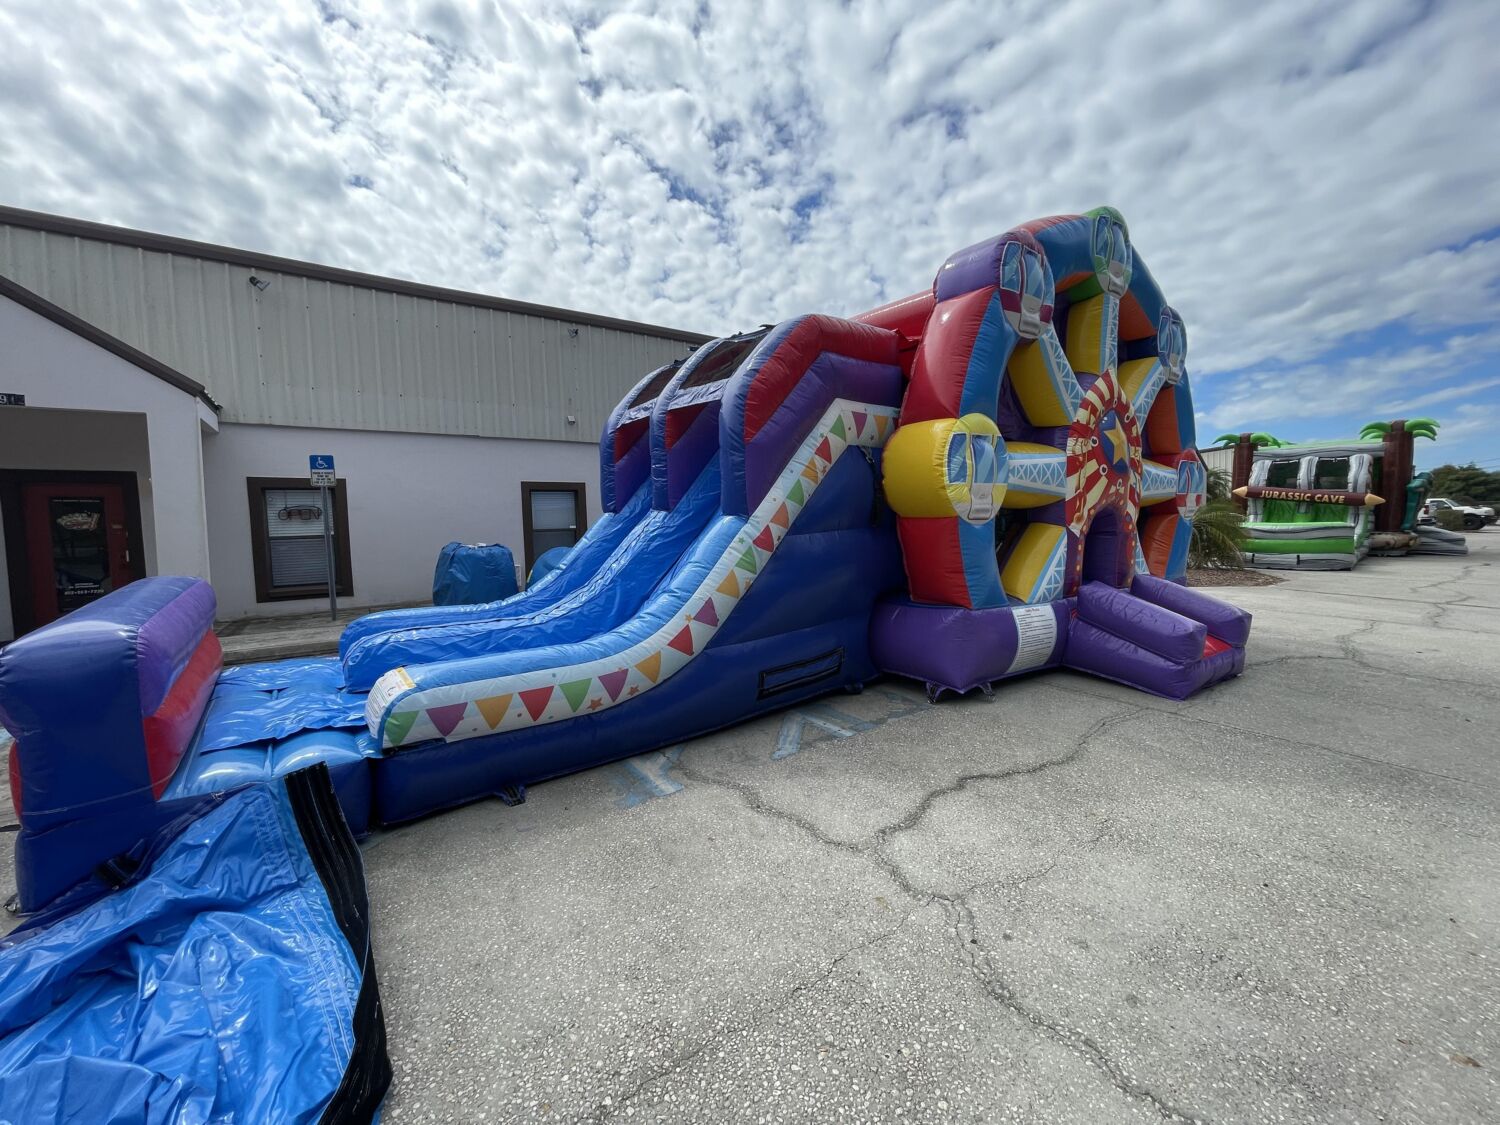 Dino World Slide/Bouncer/Obstacle Course Combo Inflatable